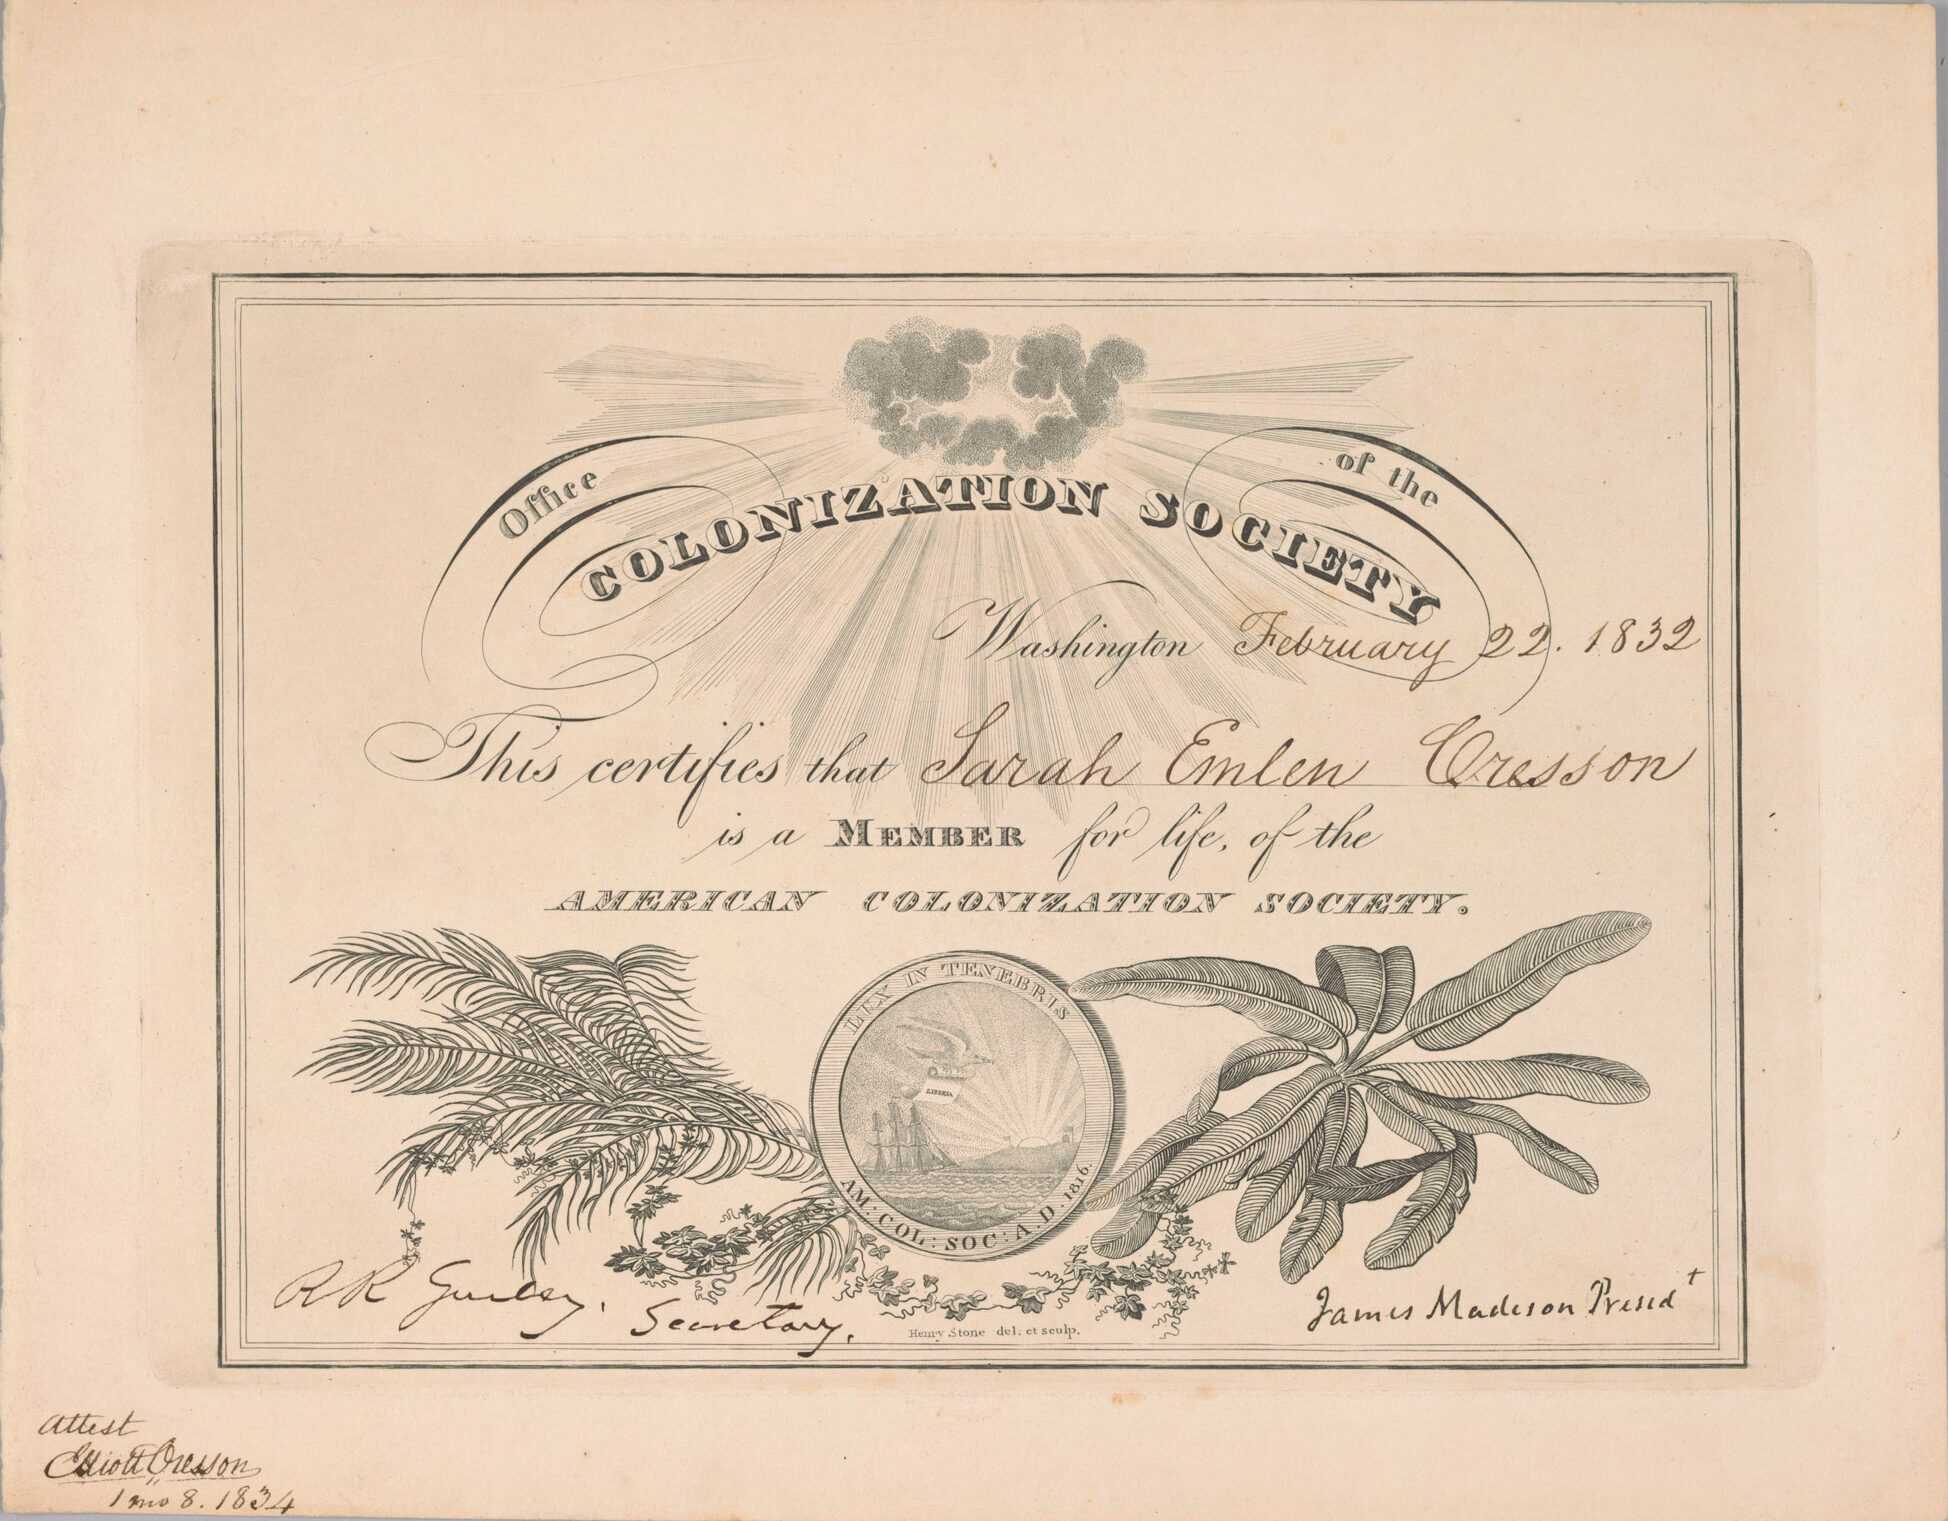 A membership certificate to the American Colonization Society for Sarah Emlen Cresson signed by James Madison as the president of the society on February 22, 1832. The certificate has pre-printed text with spaces for filling in the date and member name by hand. At the center top of the certificate is a bundle of dark clouds with a half-circle of sun rays bursting from it. At the center bottom is a seal that shows a ship following a bird across the ocean to Liberia with text in the outer rim reading "LUX IN TENEBRIS / AM: COL: SOC: A.D. 1816." The seal is surrounded by various types of foliage. The certificate is signed in the bottom left corner by "R.R. Gurley, Secretary" and in the bottom right corner by "James Madison Presed't" inside the lined border of the certificate, and in the bottom left corner outside the border "Attest / Elliott Cresson / 1 mo 8. 1834". The reverse is blank.